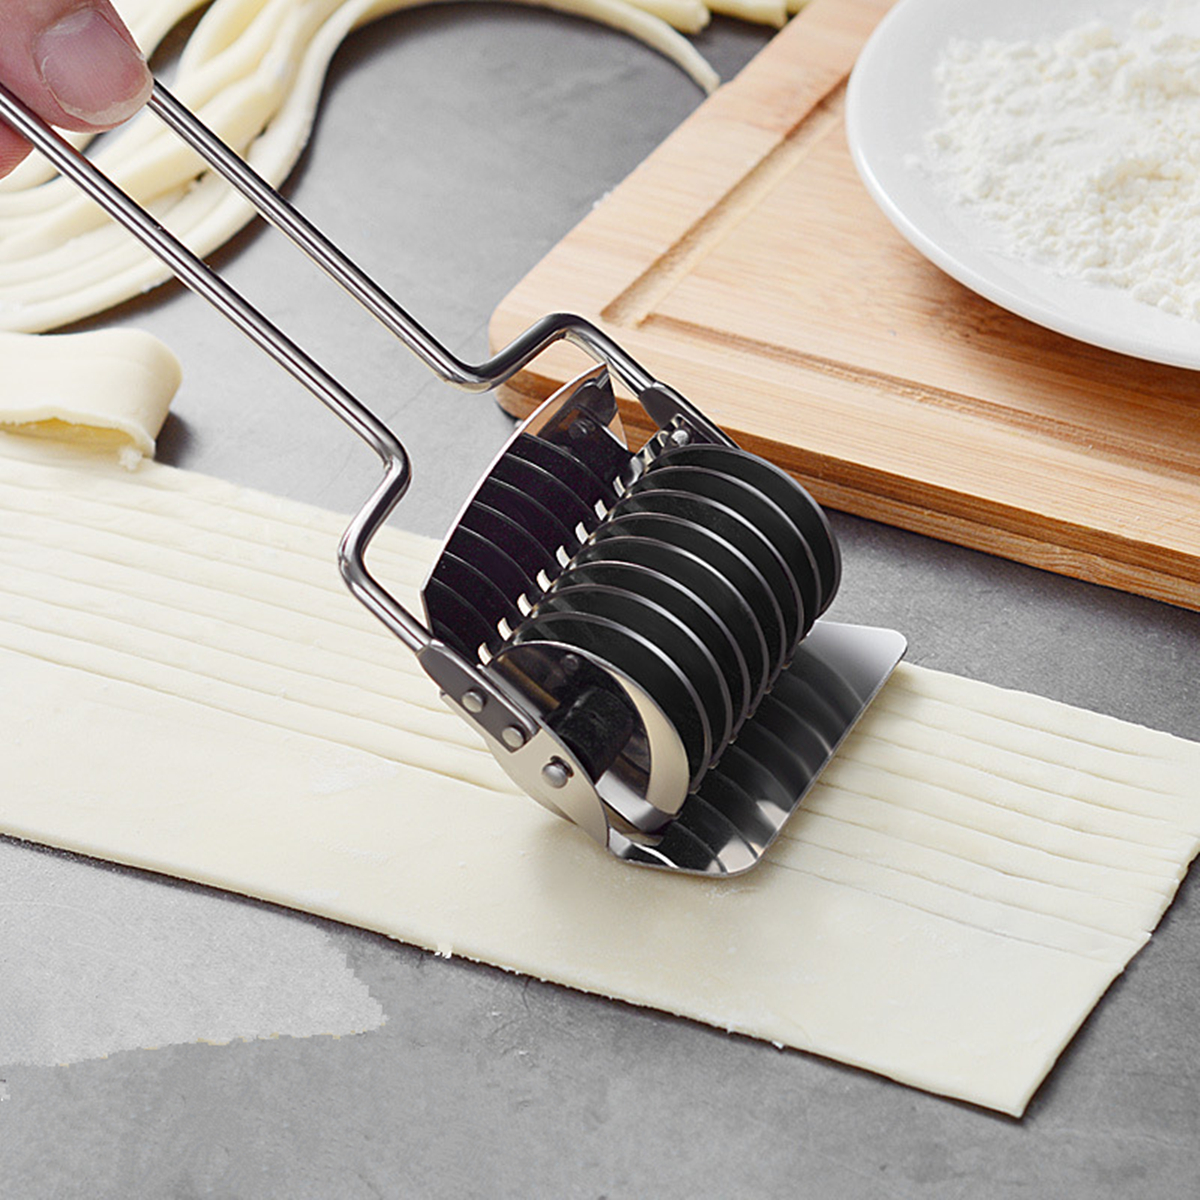 Stainless Steel Noodle Cutter Roller, Manual Pasta Roller Cutting